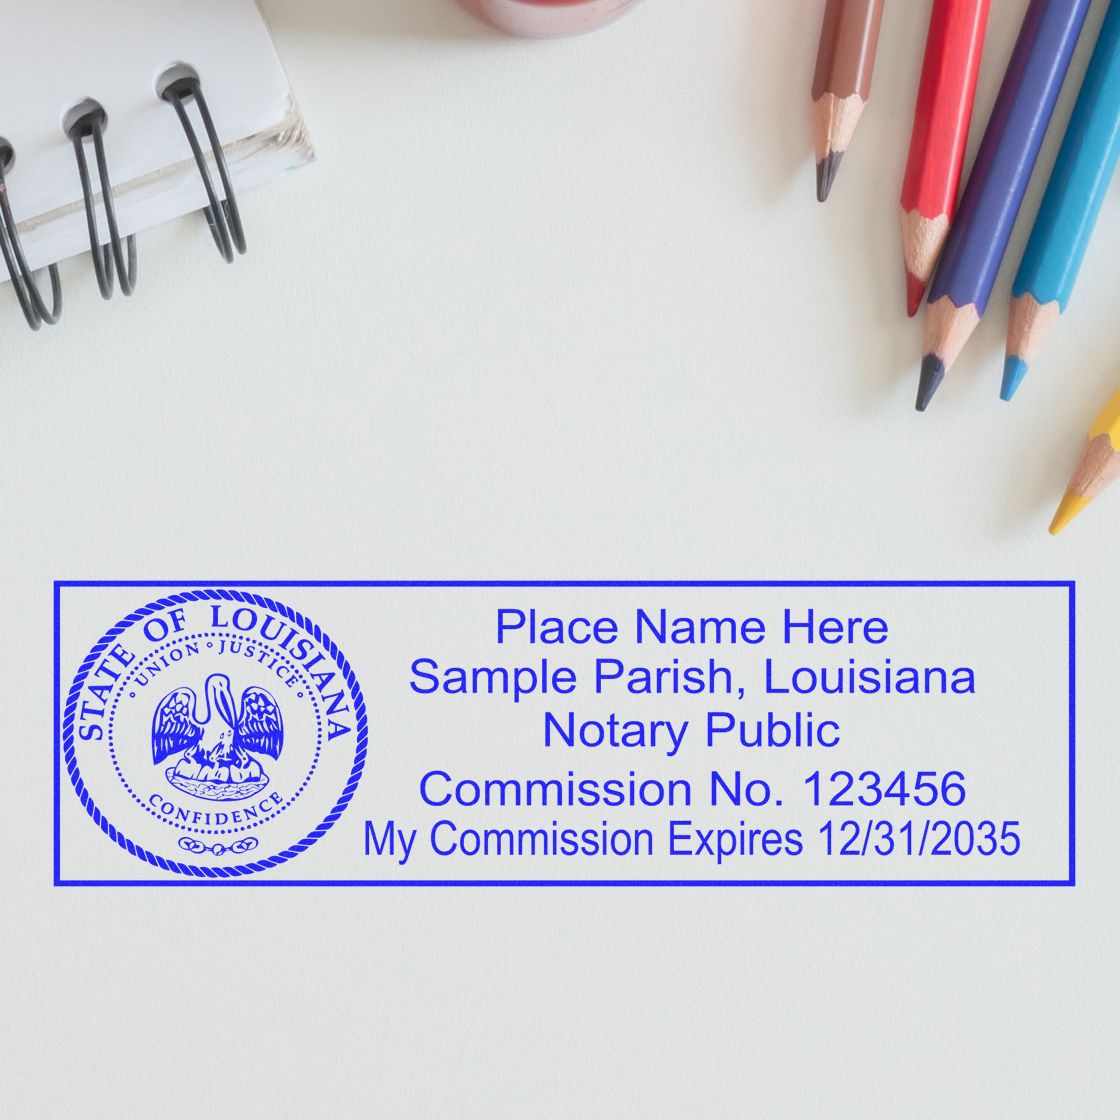 Slim Pre-Inked State Seal Notary Stamp for Louisiana in use photo showing a stamped imprint of the Slim Pre-Inked State Seal Notary Stamp for Louisiana